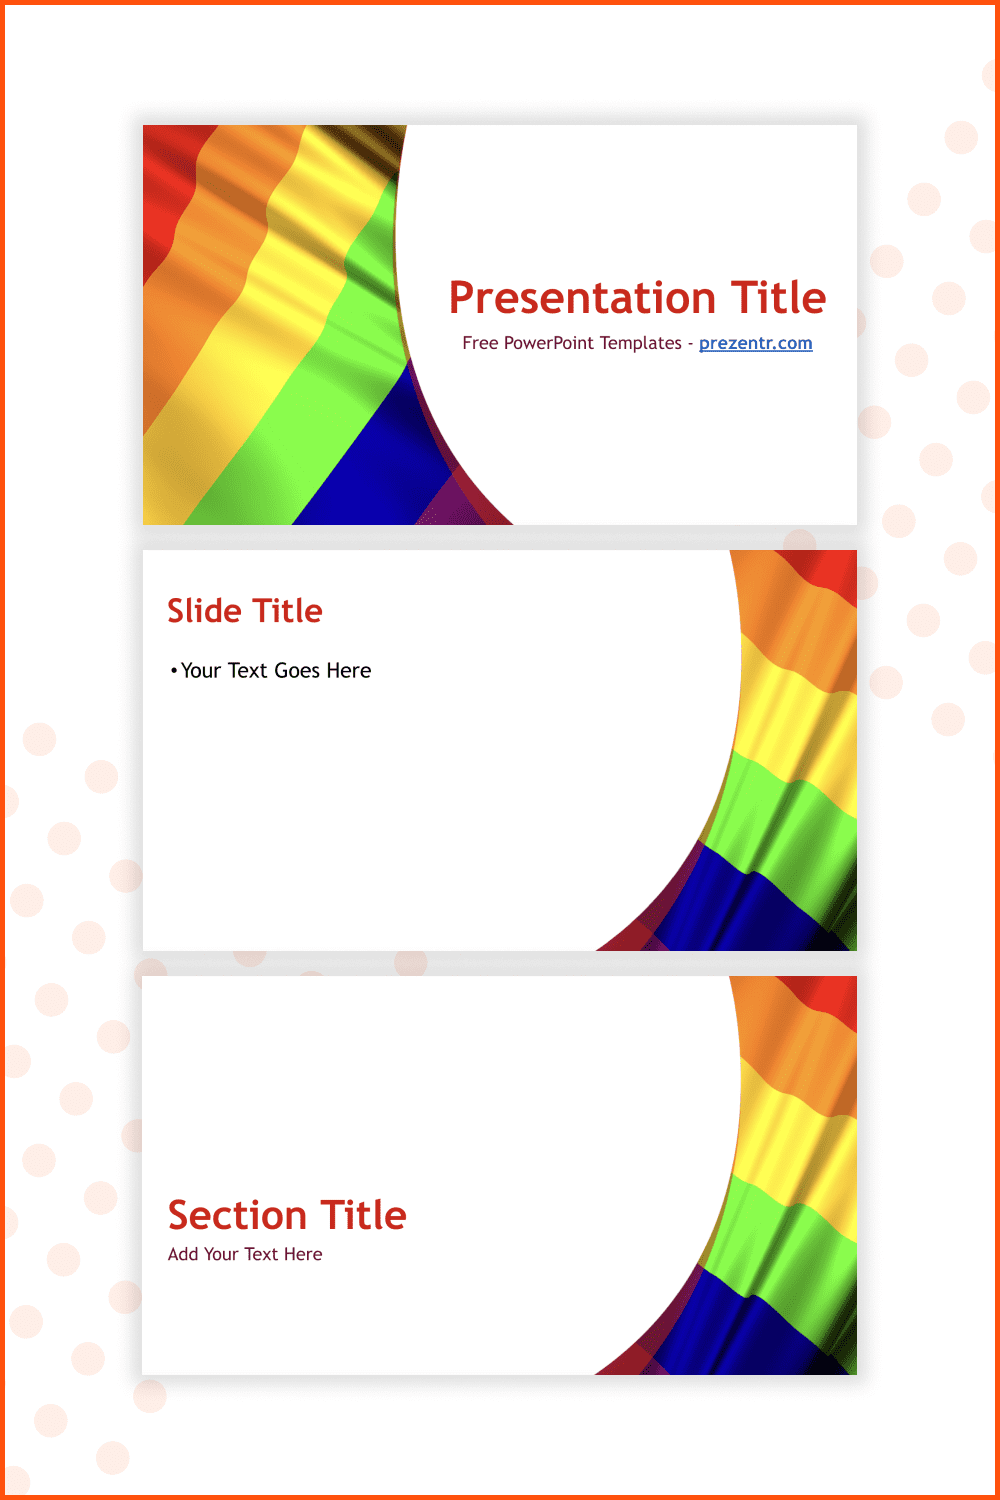 Colorful LGBT powerpoint template.